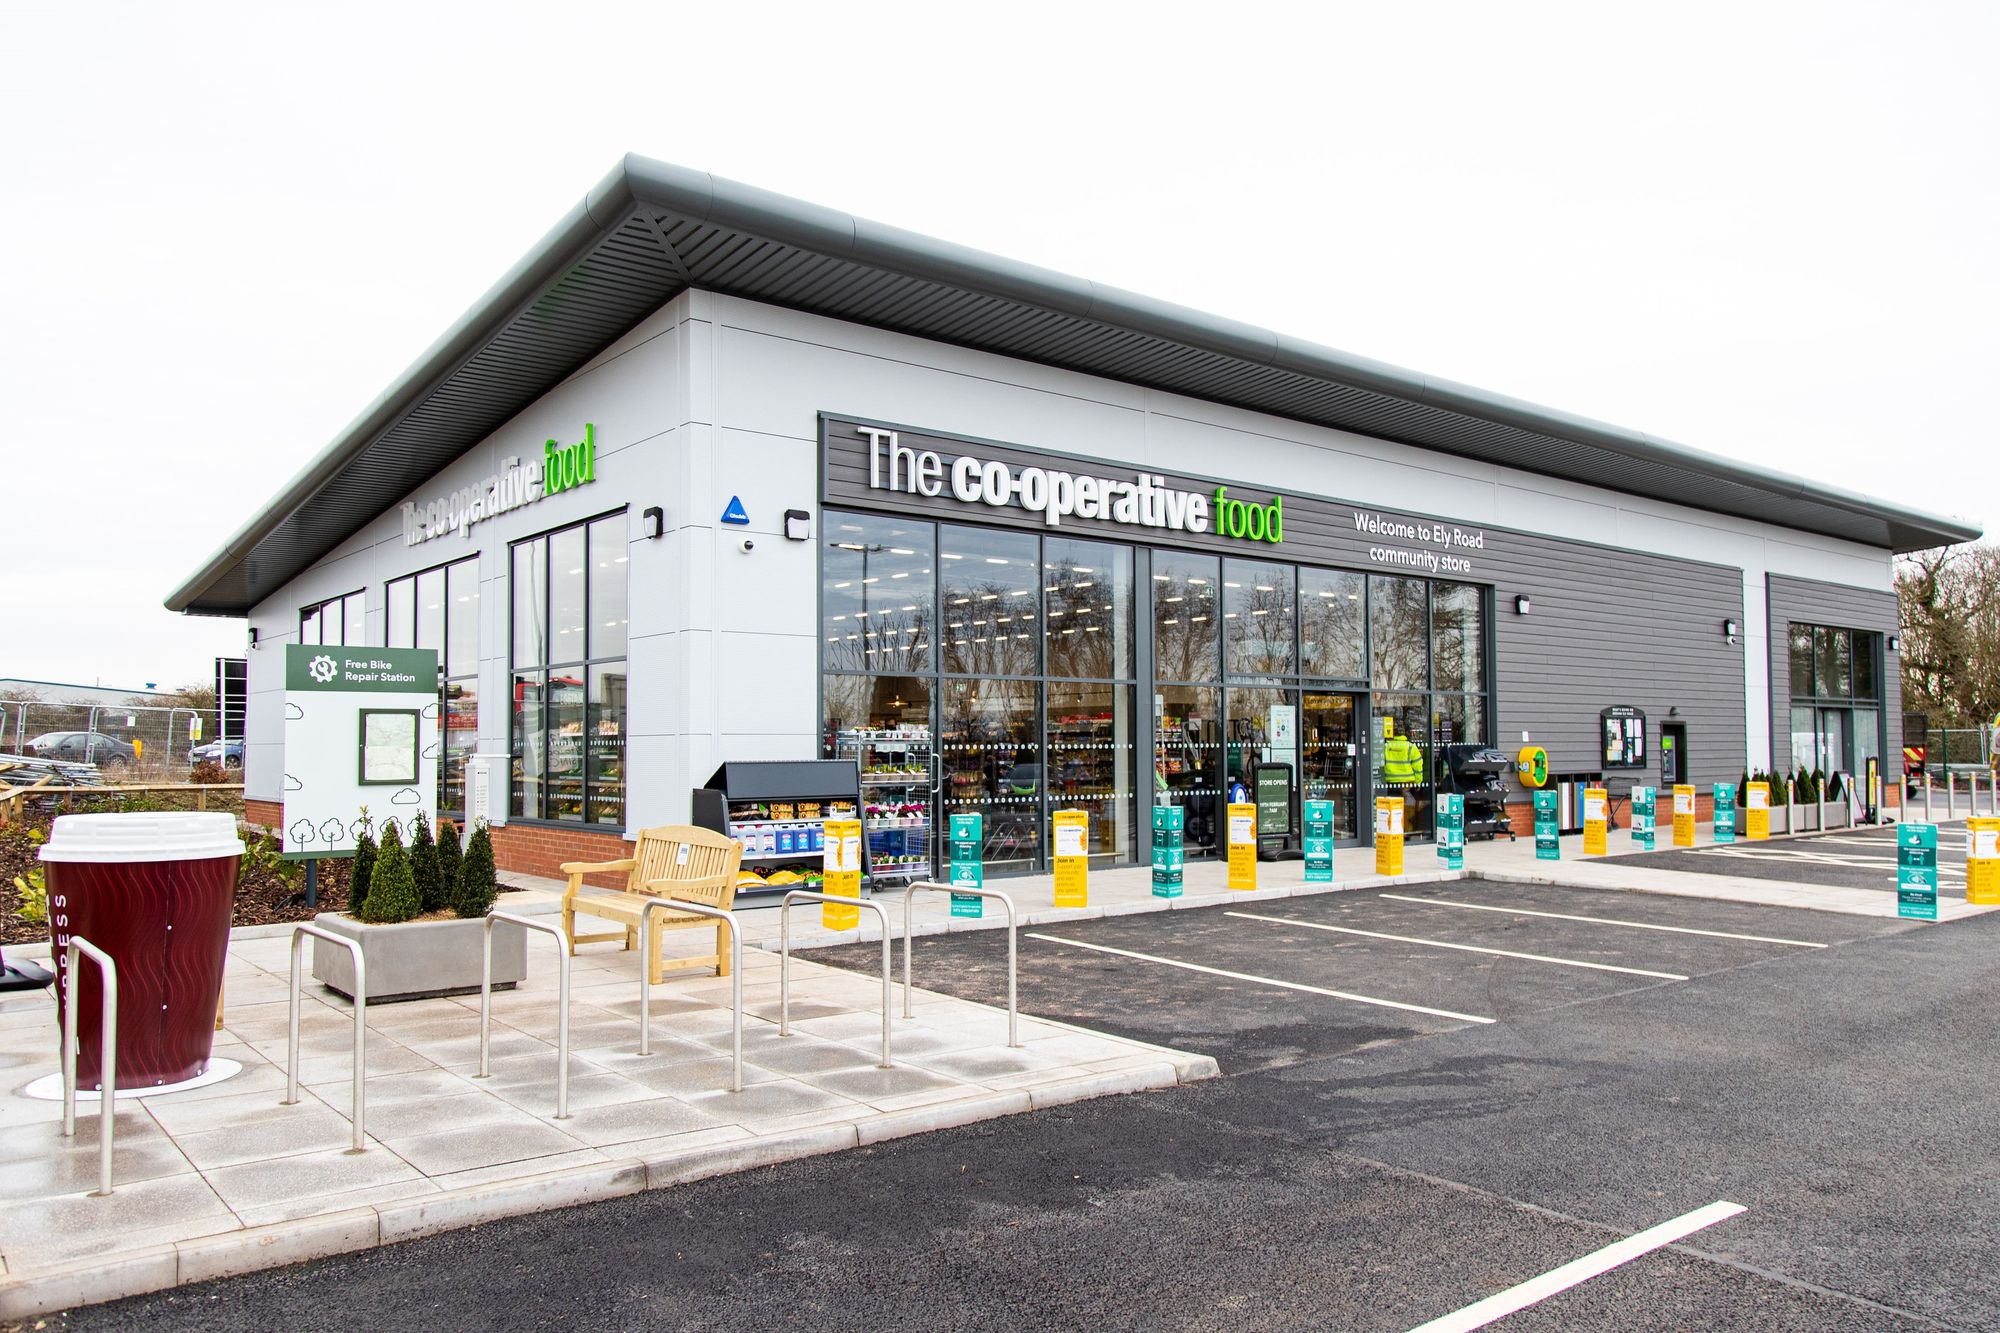 Central England Co-op invests over £8 million in new stores and improvements during 2021